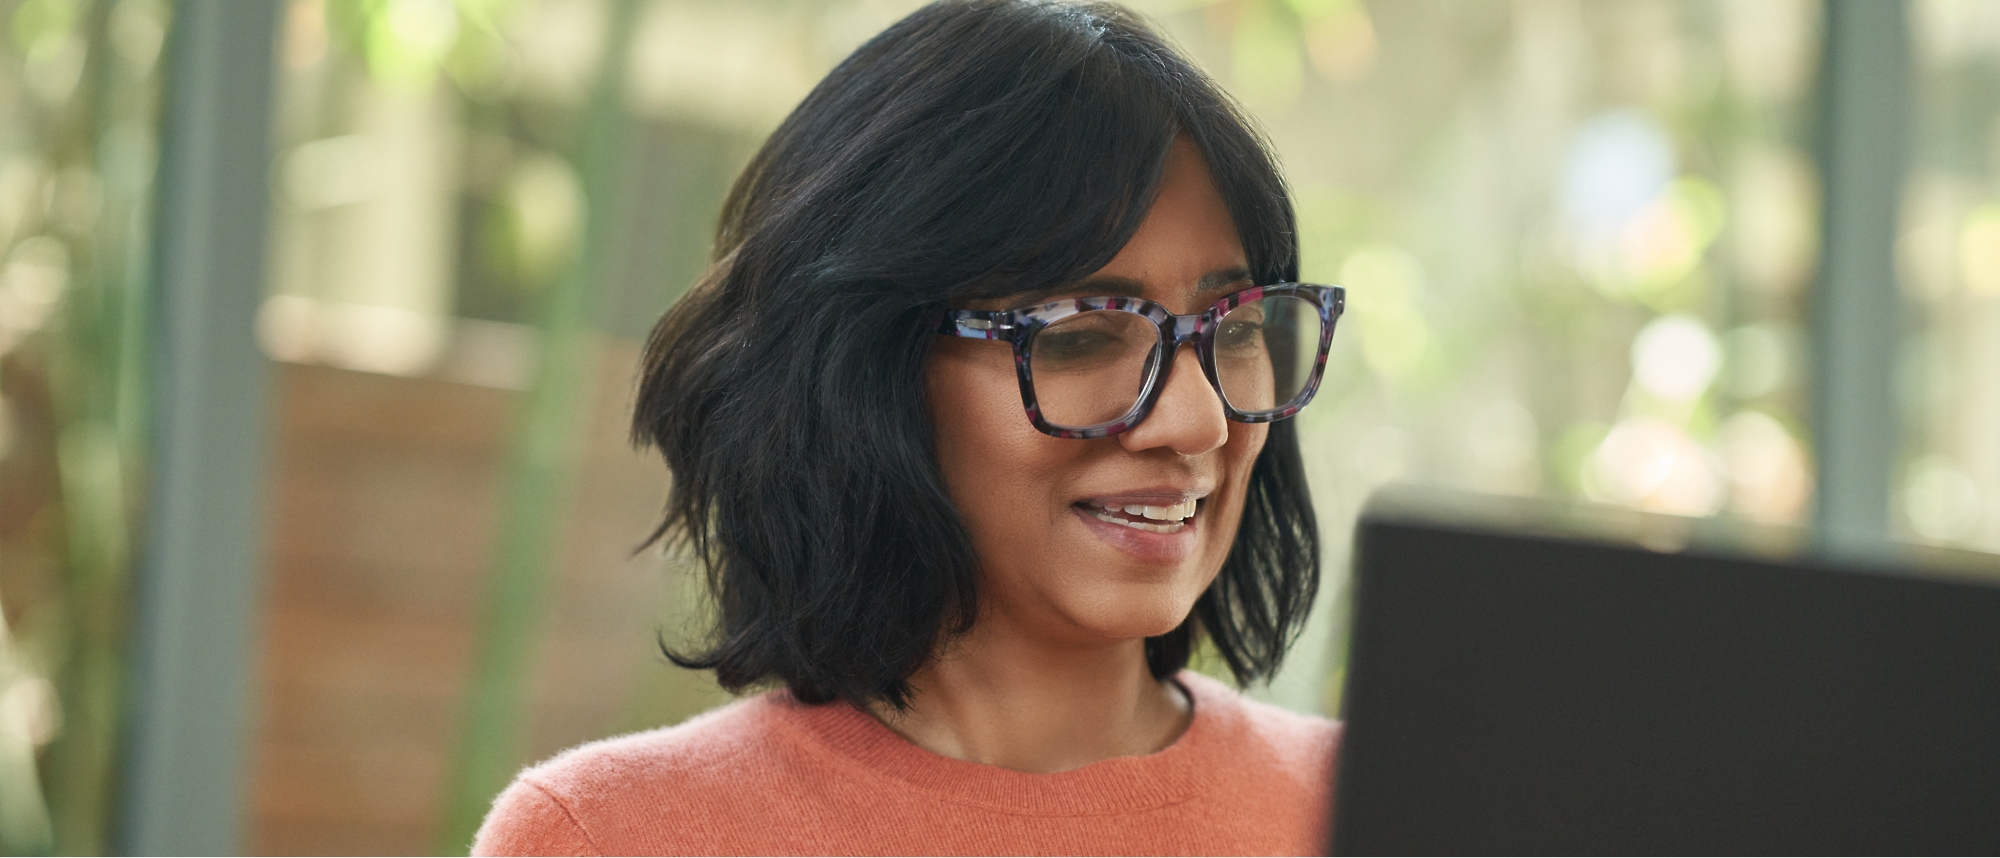 A person with short black hair and glasses is smiling while looking at a laptop screen. They are wearing an orange sweater.